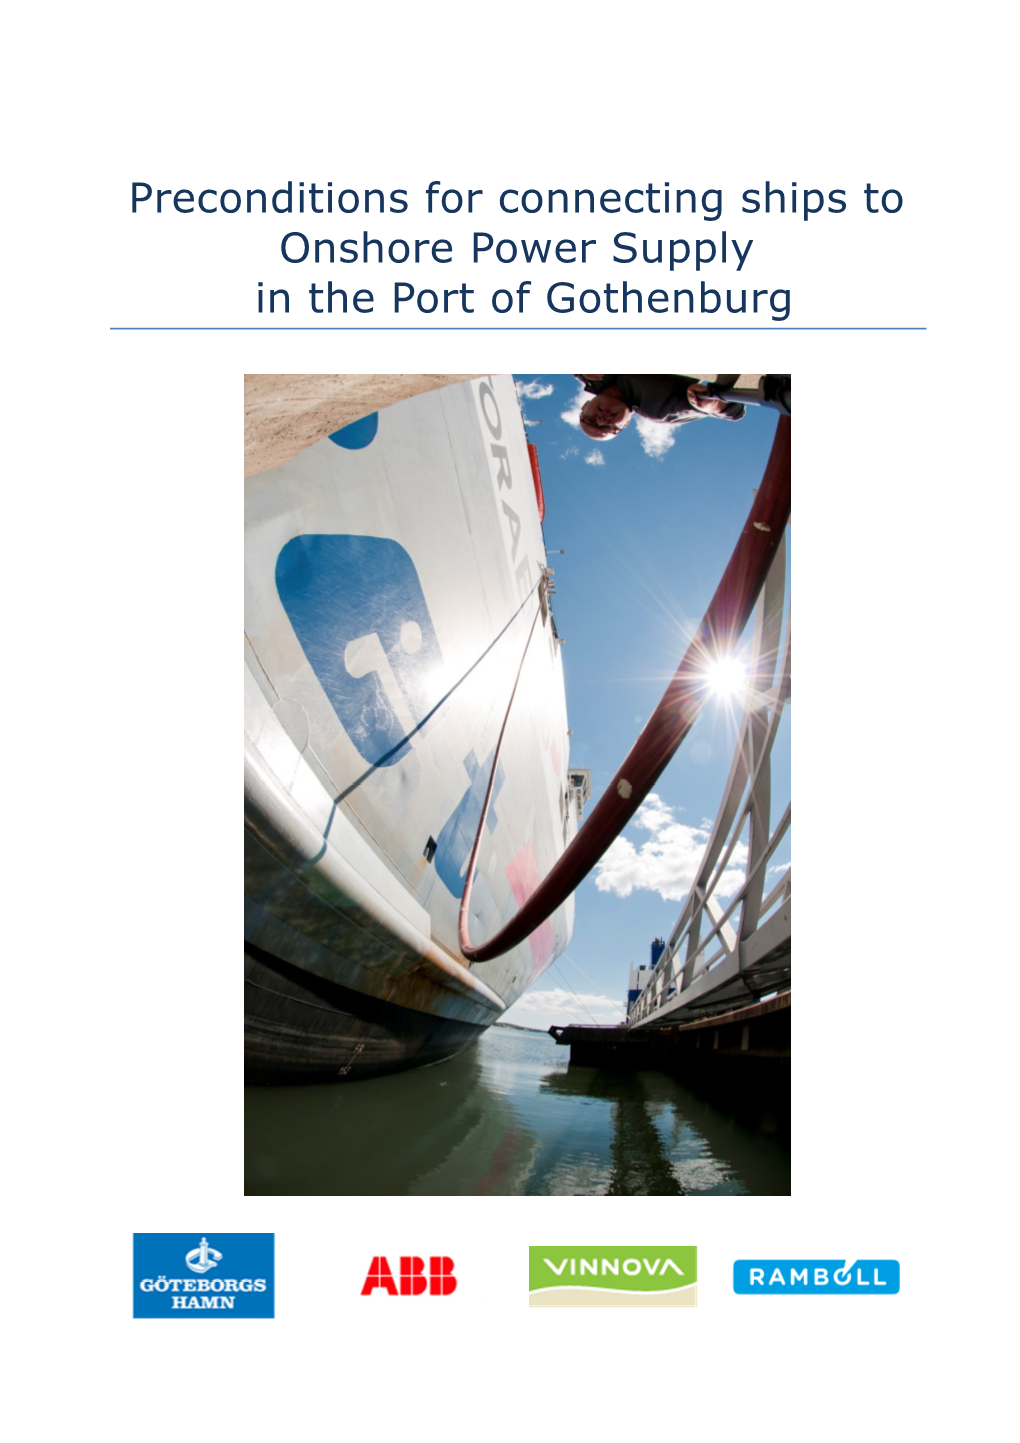 Preconditions for Connecting Ships to Onshore Power Supply in the Port of Gothenburg